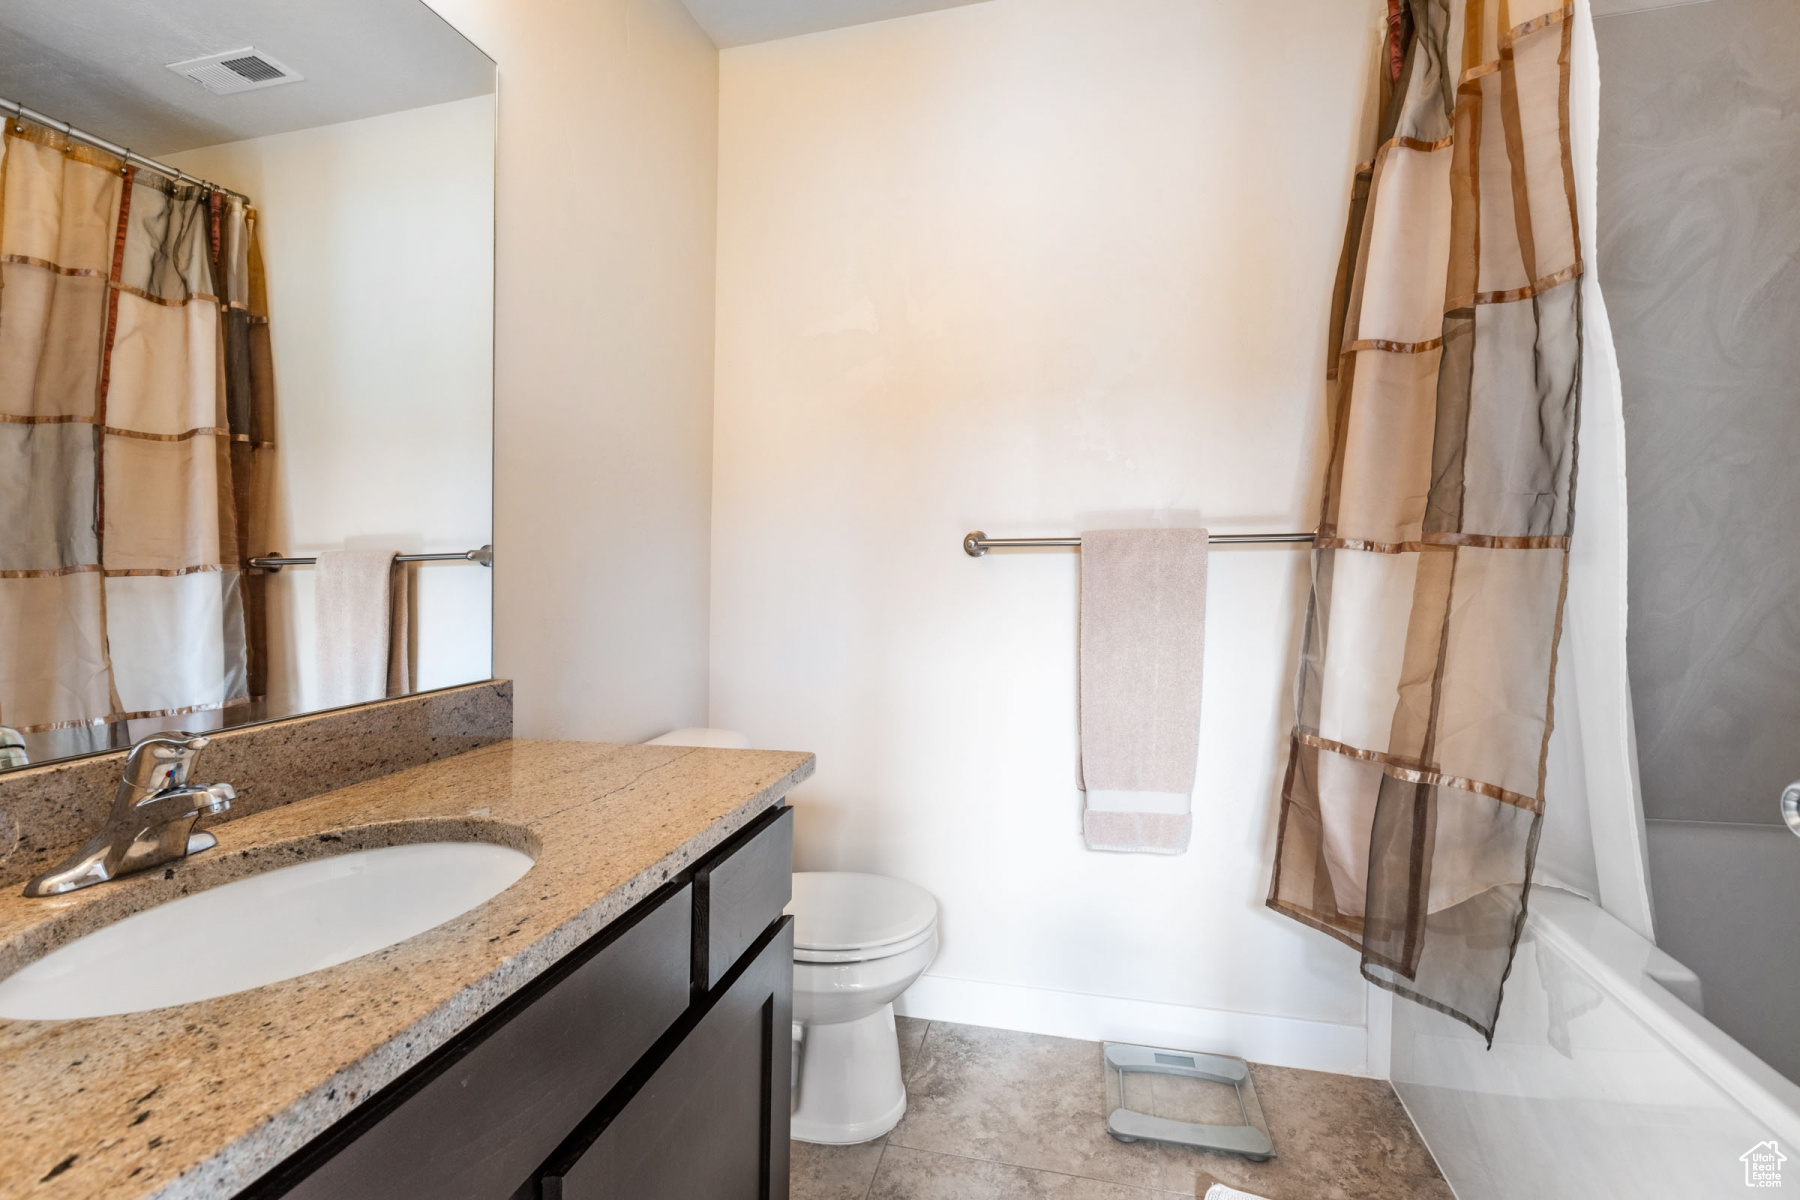 Ensuite bathroom with large soaking tub/shower combo!